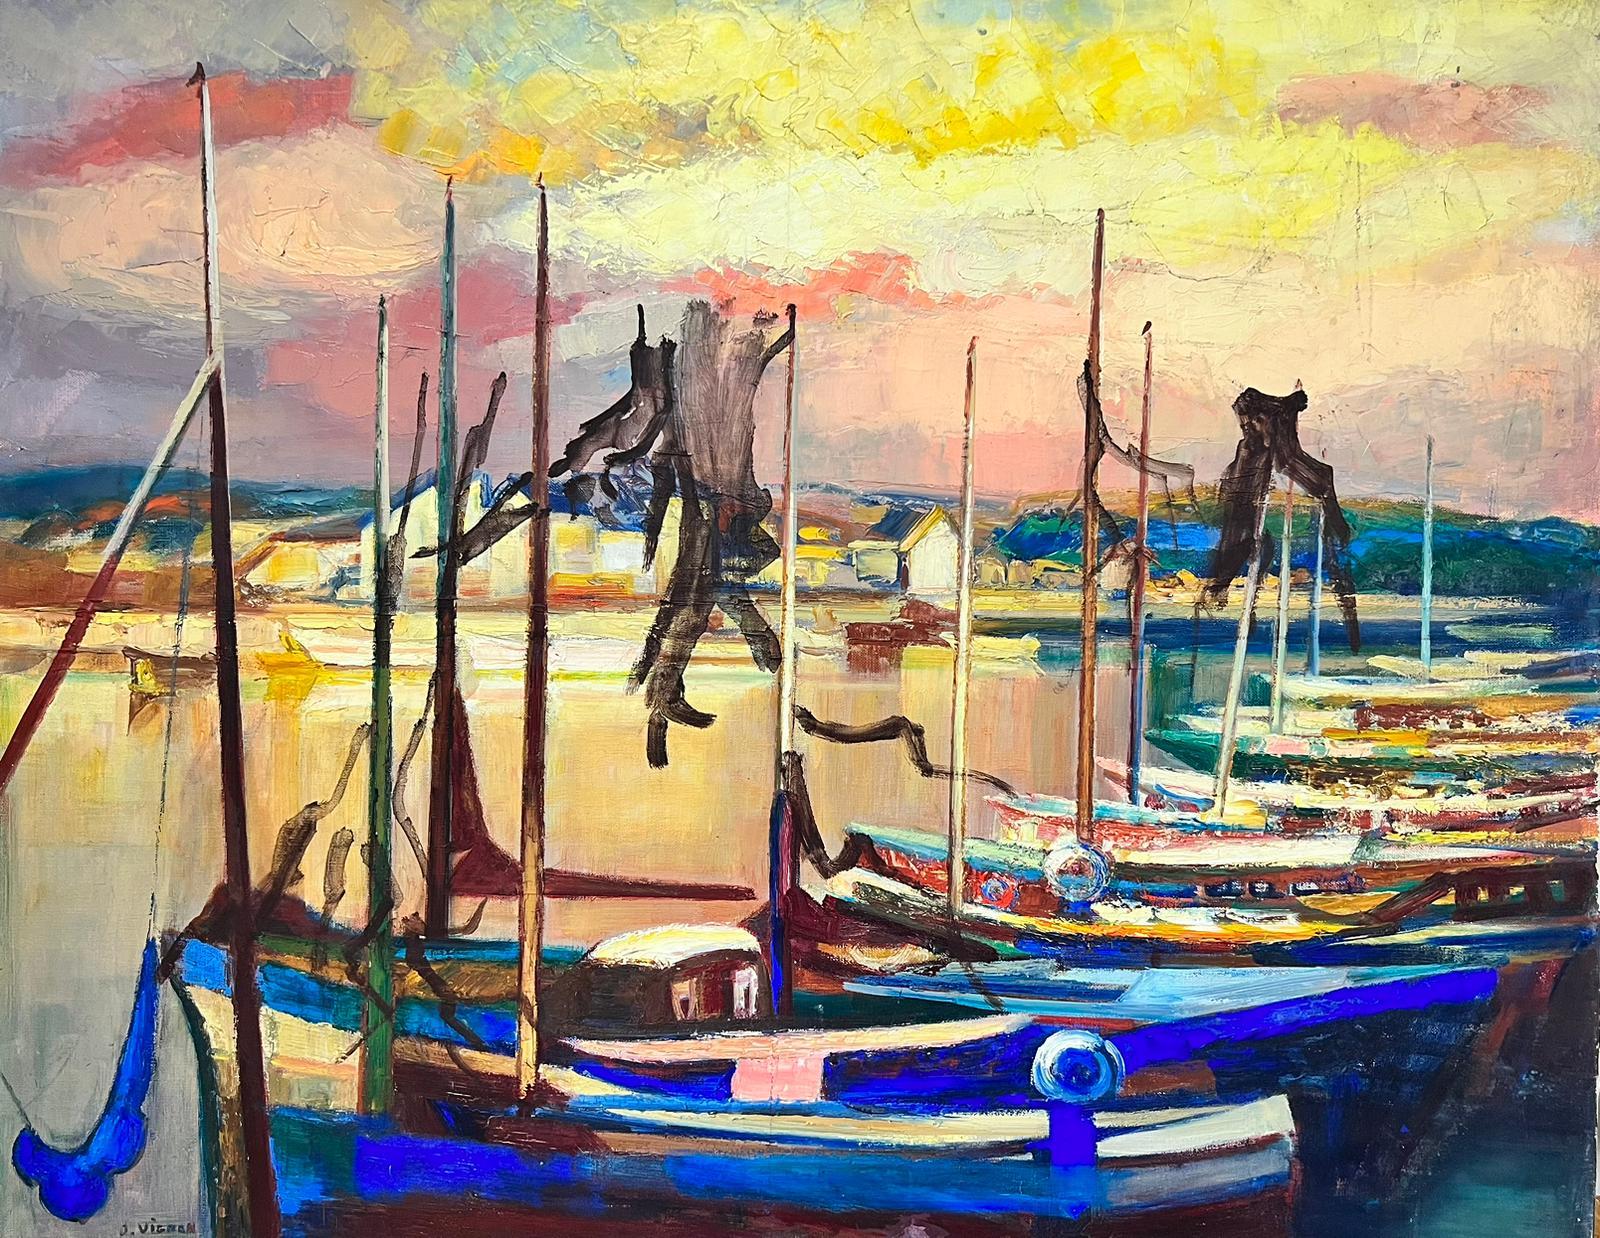 Josine Vignon Figurative Painting - Sunset over Blue Boats in Harbor Very Large 1970’s French Signed Oil on Canvas